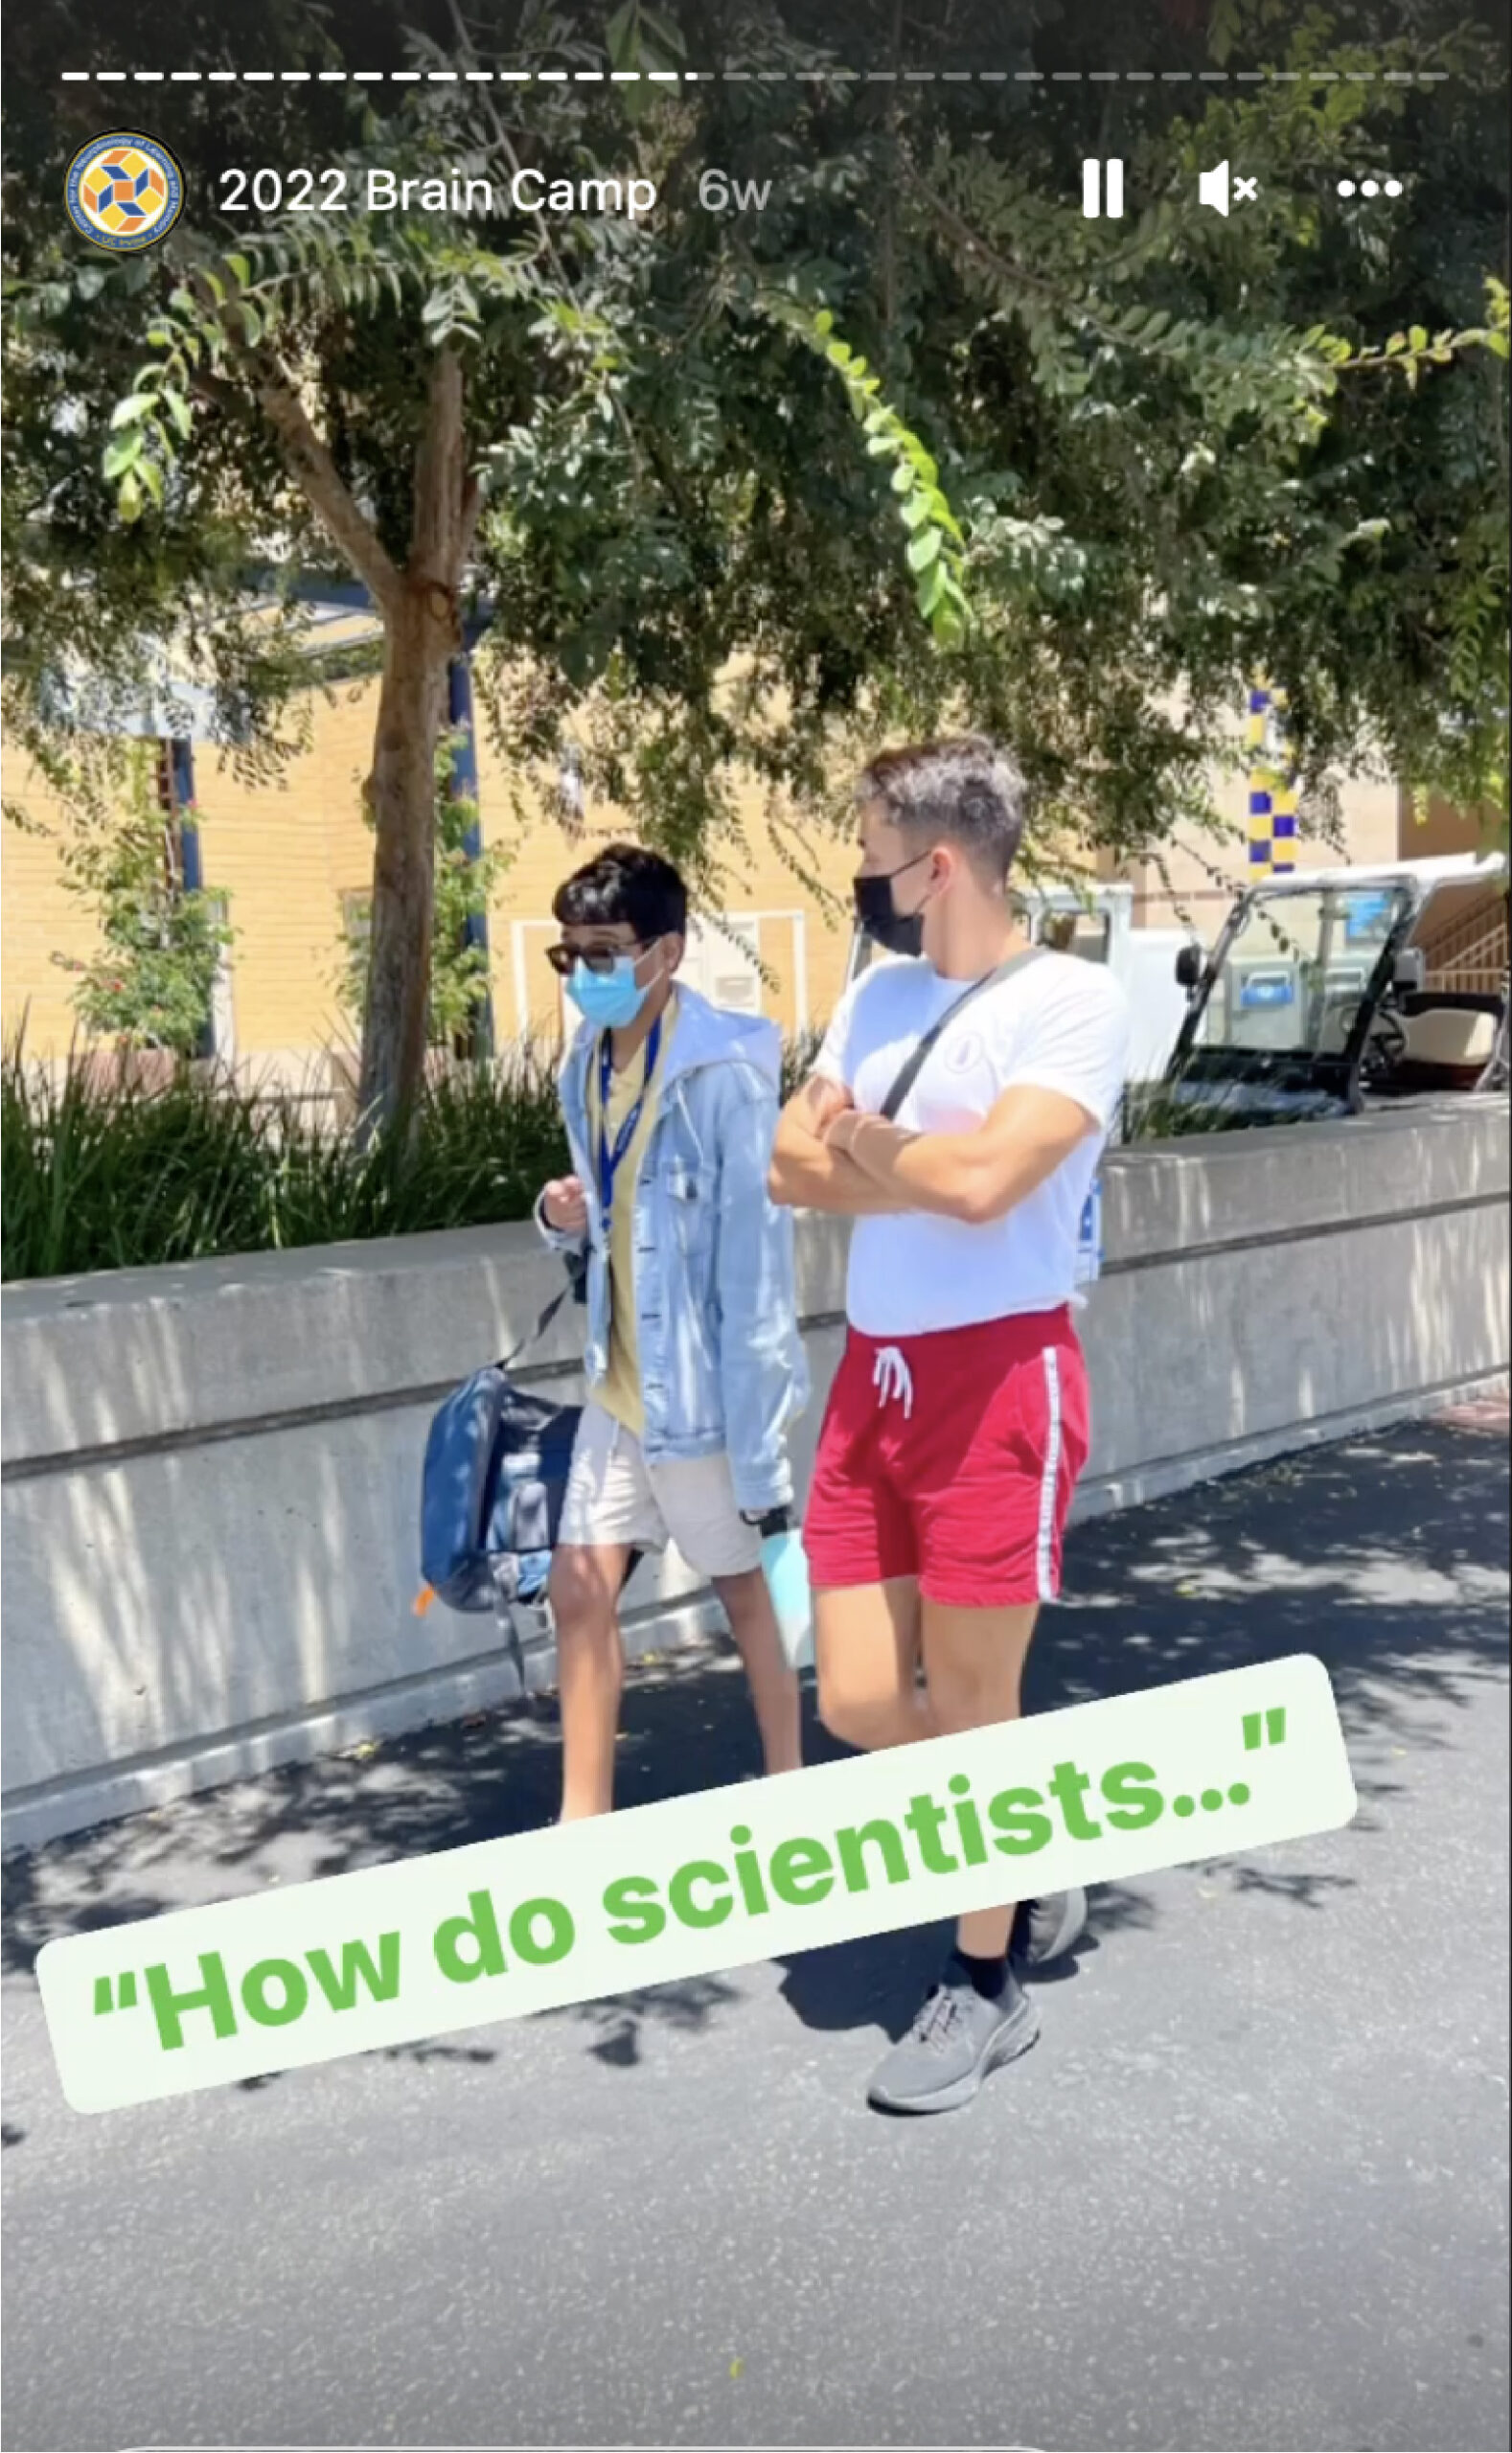 UCI Brain Camp student asks question to UCI Neuroscientist